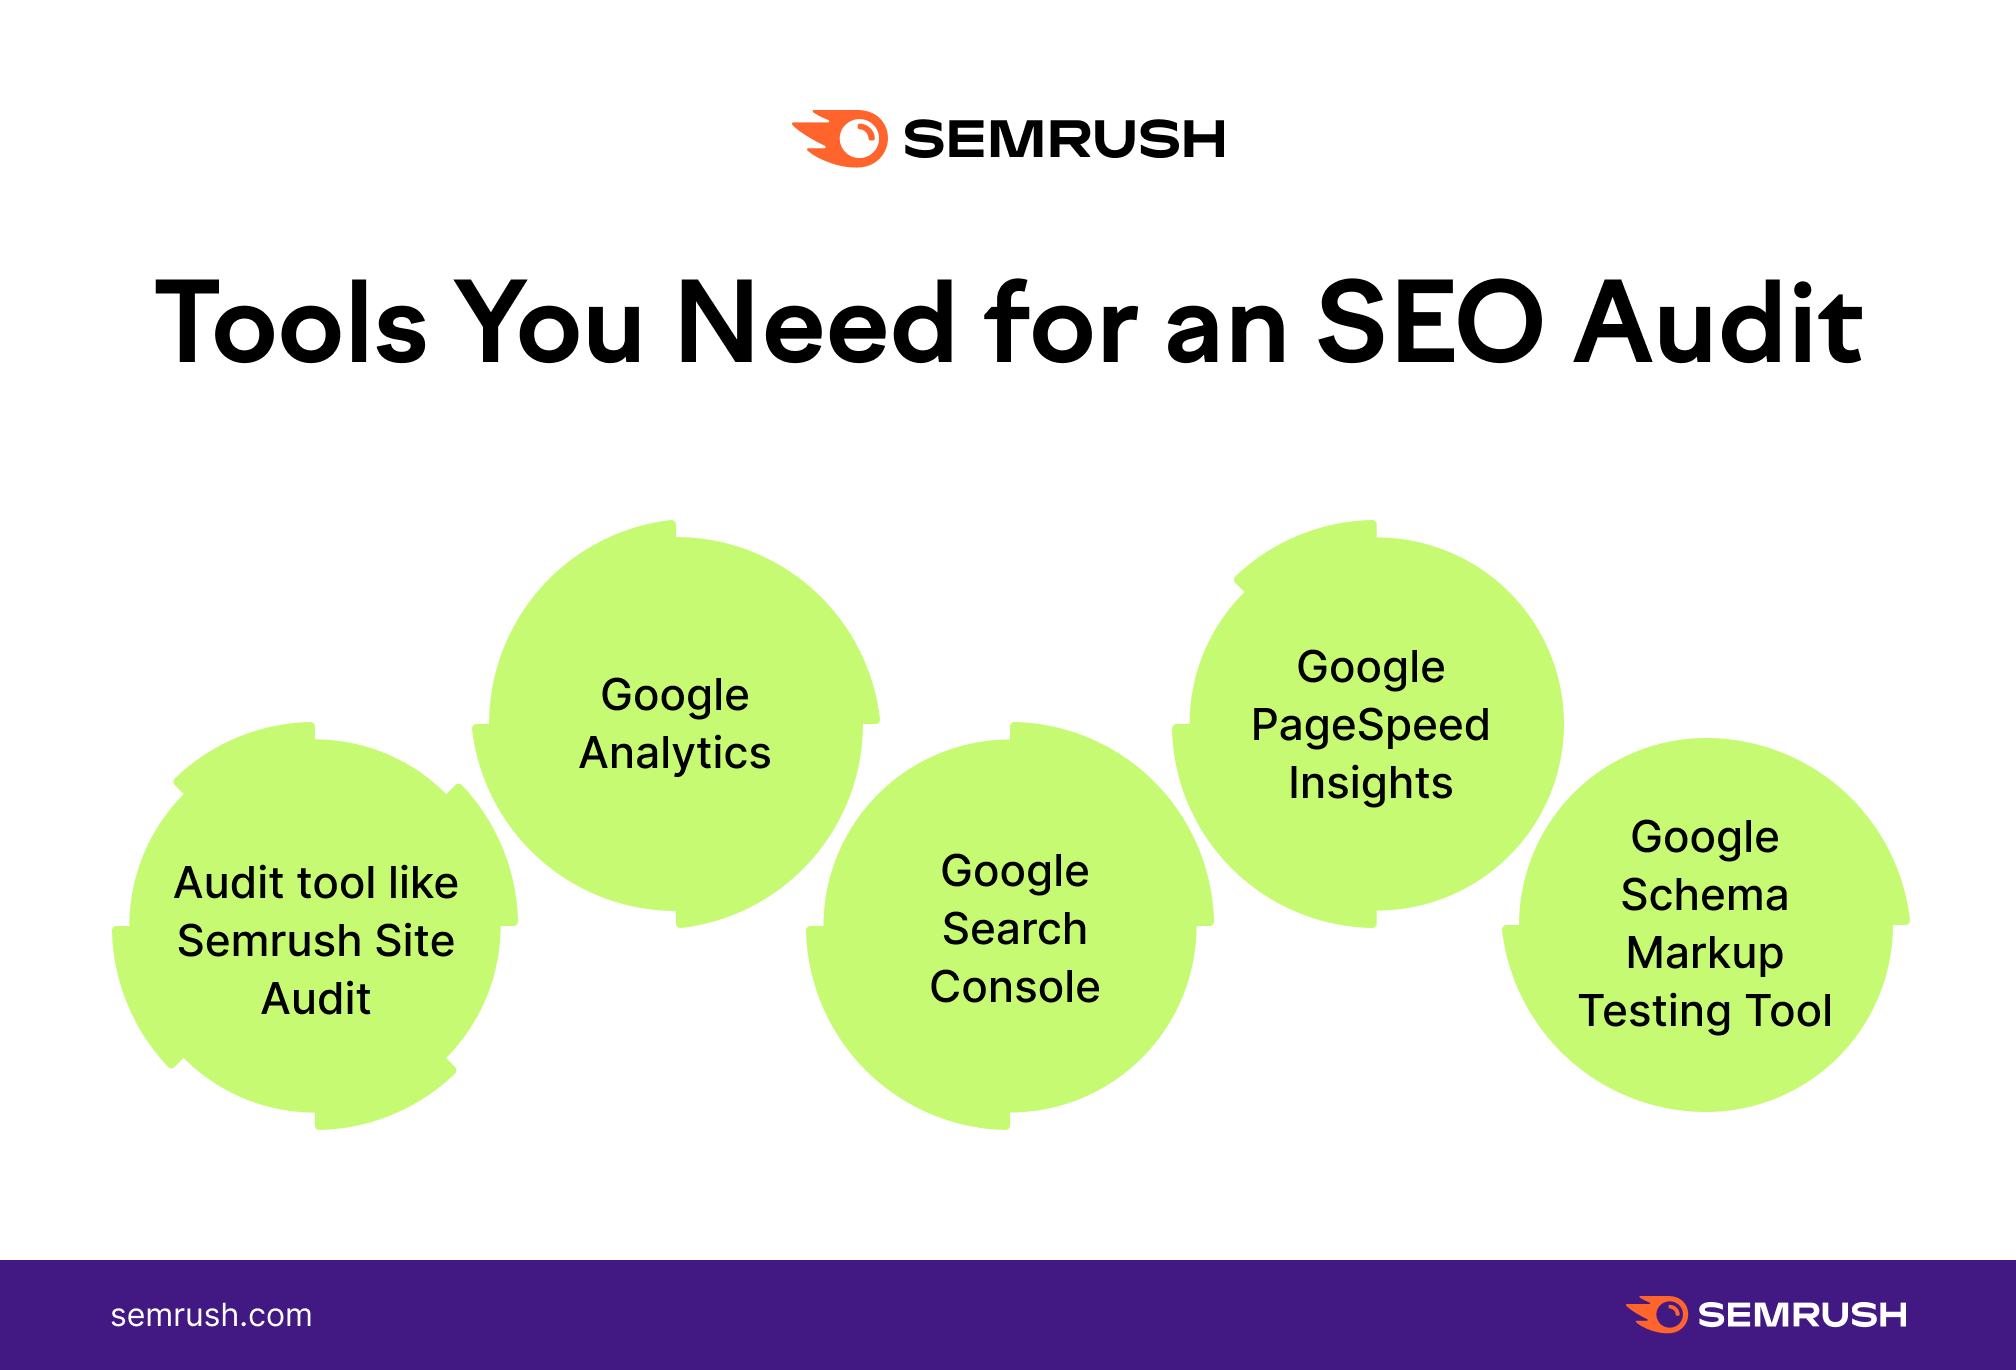 How to Perform an SEO Audit in 18 Steps